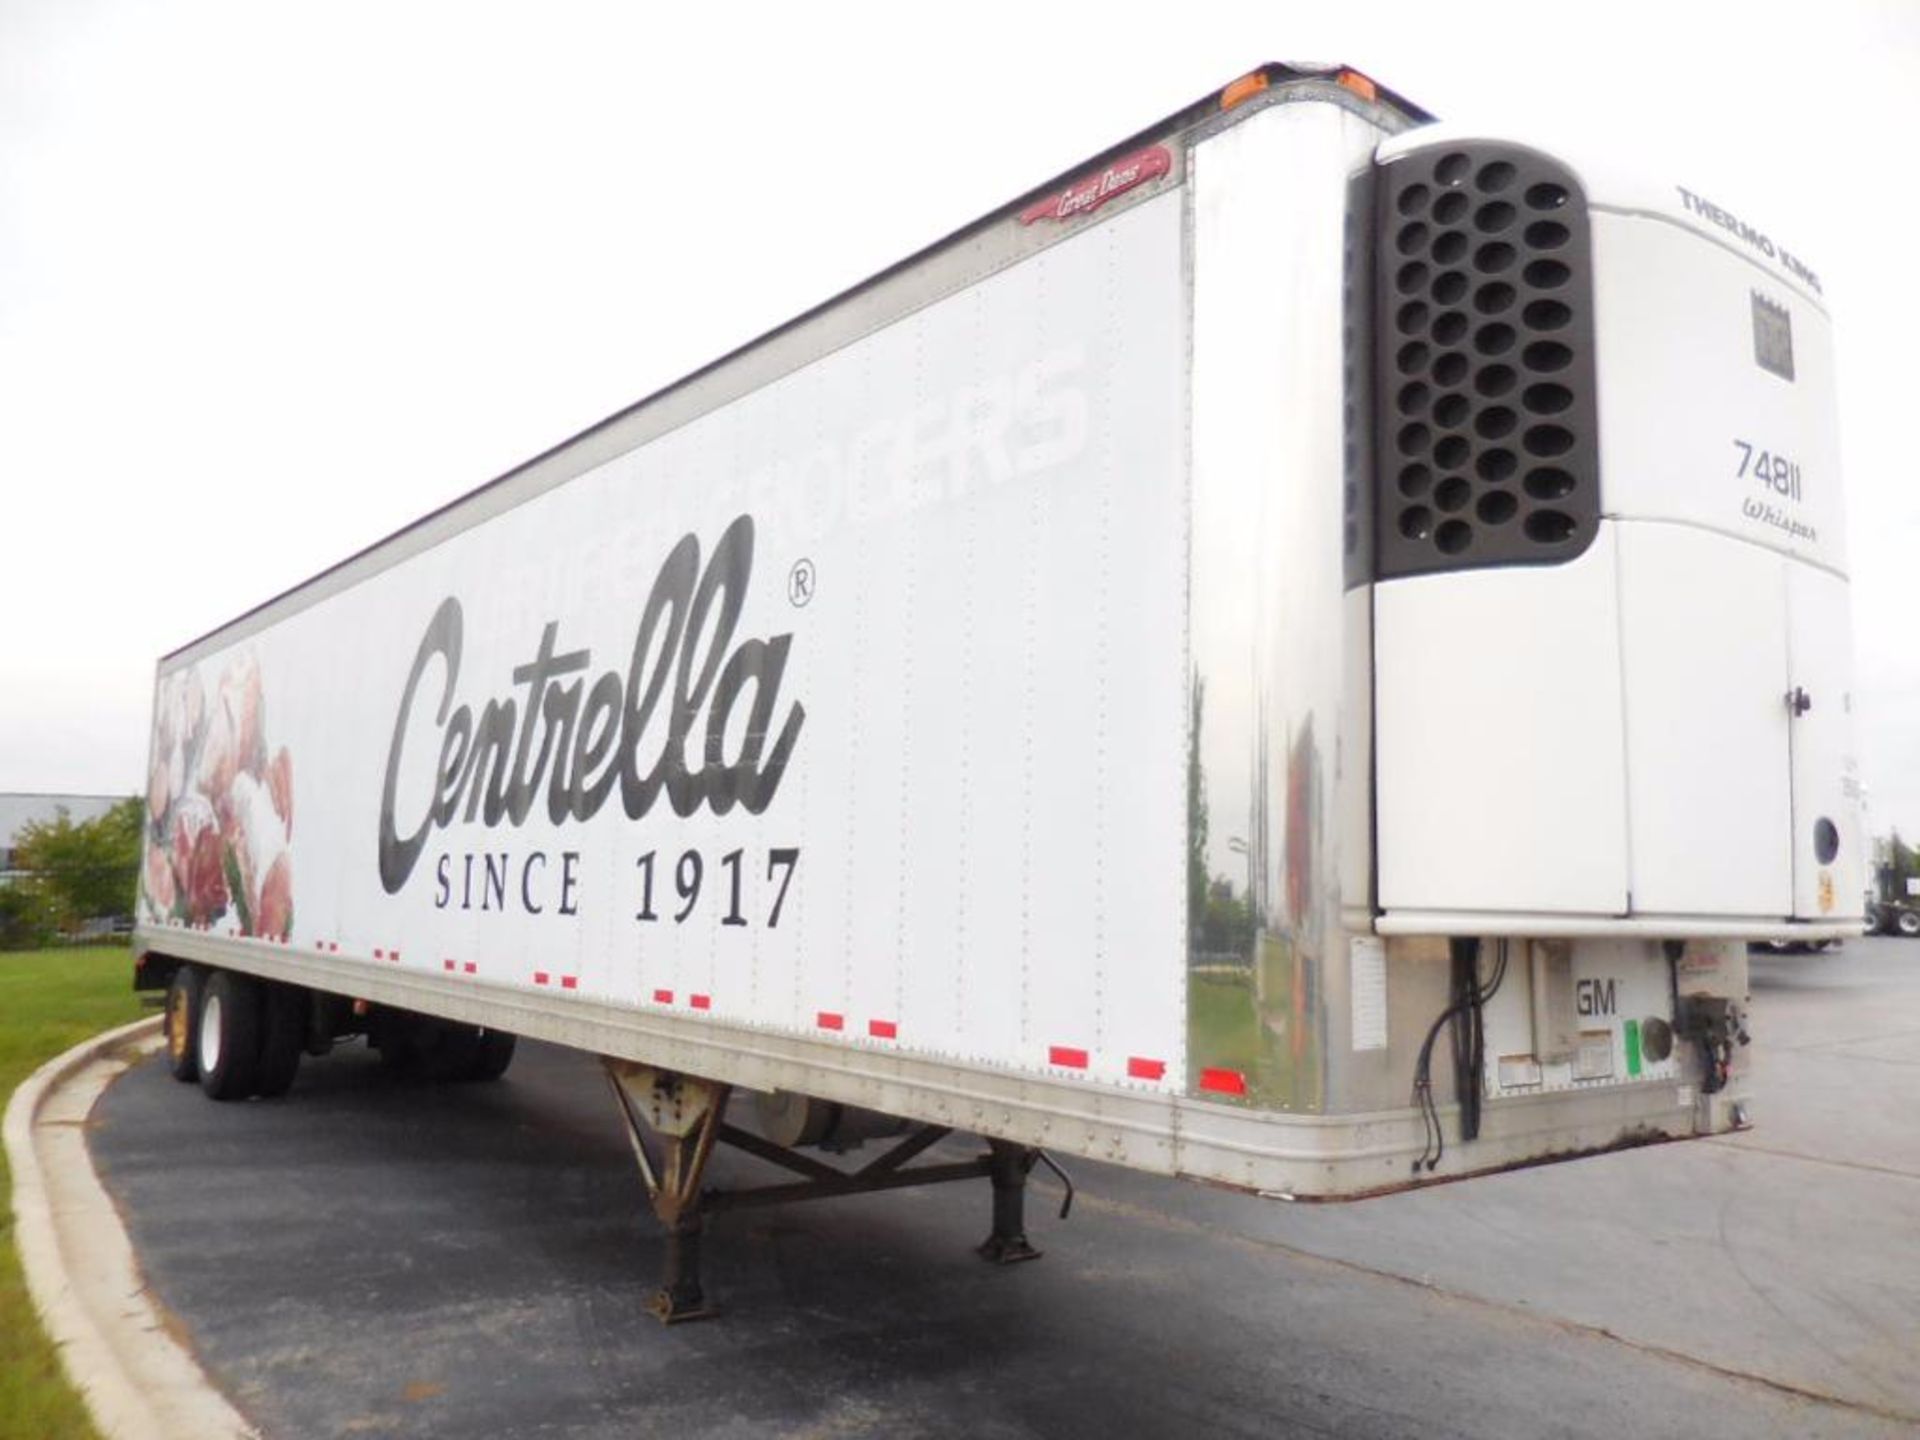 2004 Great Dane 48' Refrigerated Trailer, VIN # 1GRAA96275B703742, Unit 74811 - Image 2 of 22